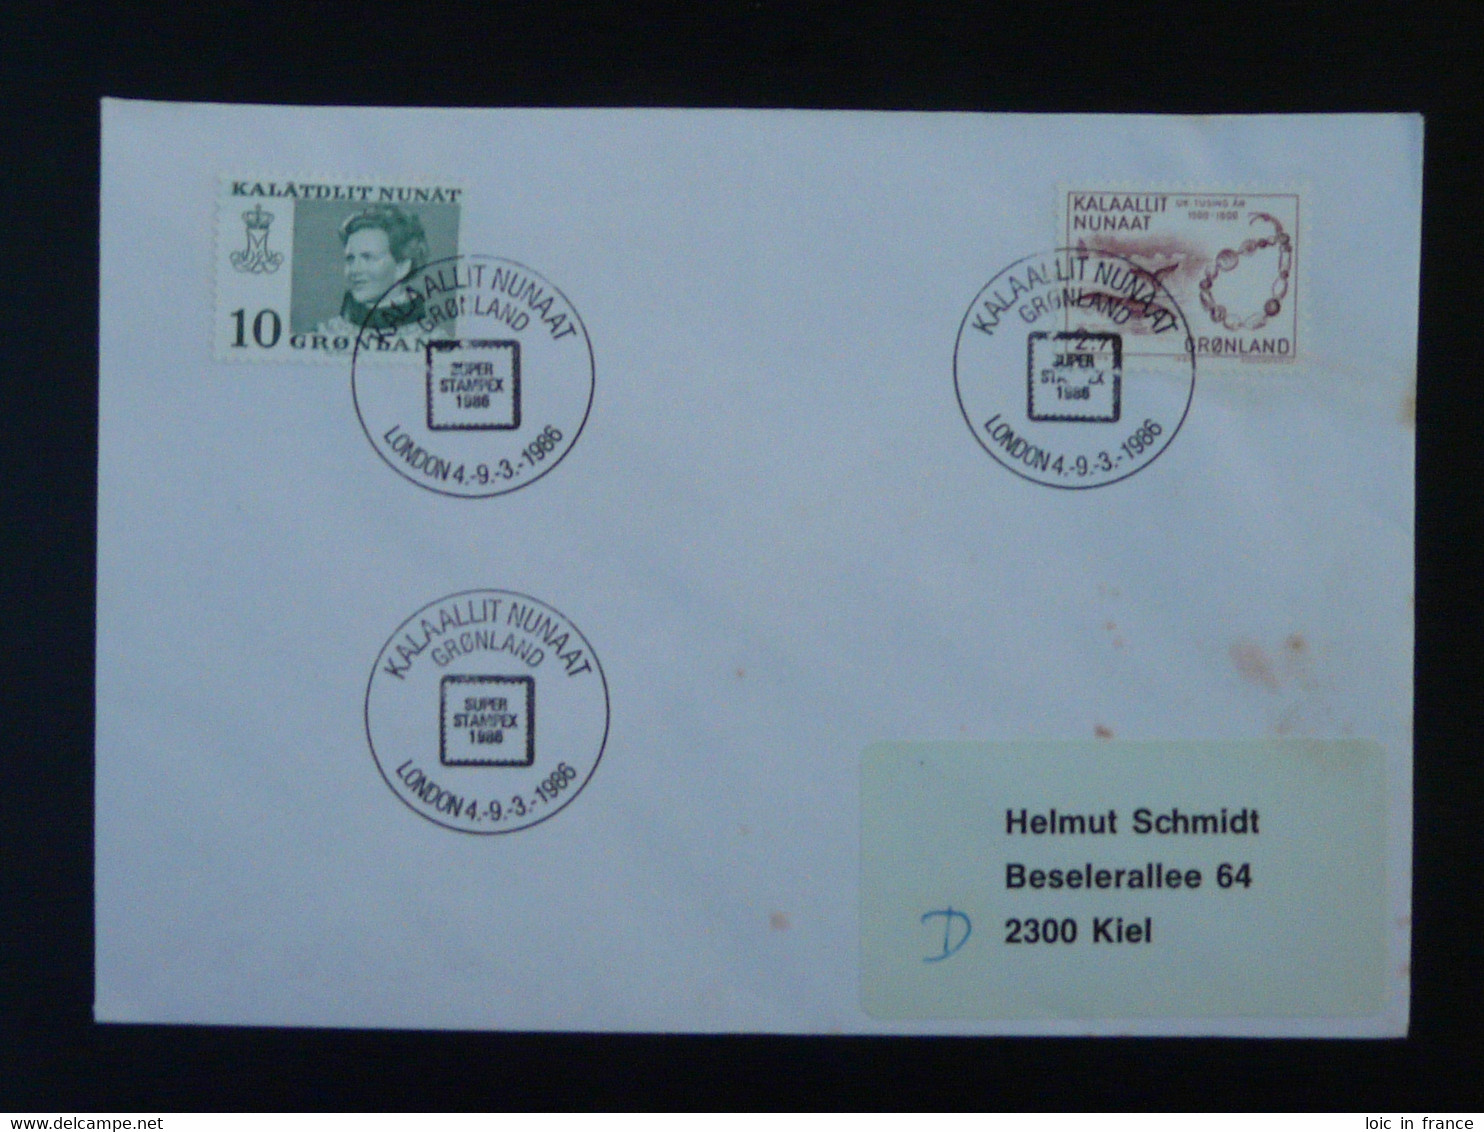 Lettre Cover Obliteration Postmark Stampex 1986 London Groenland Greenland (ex 3) - Marcofilie